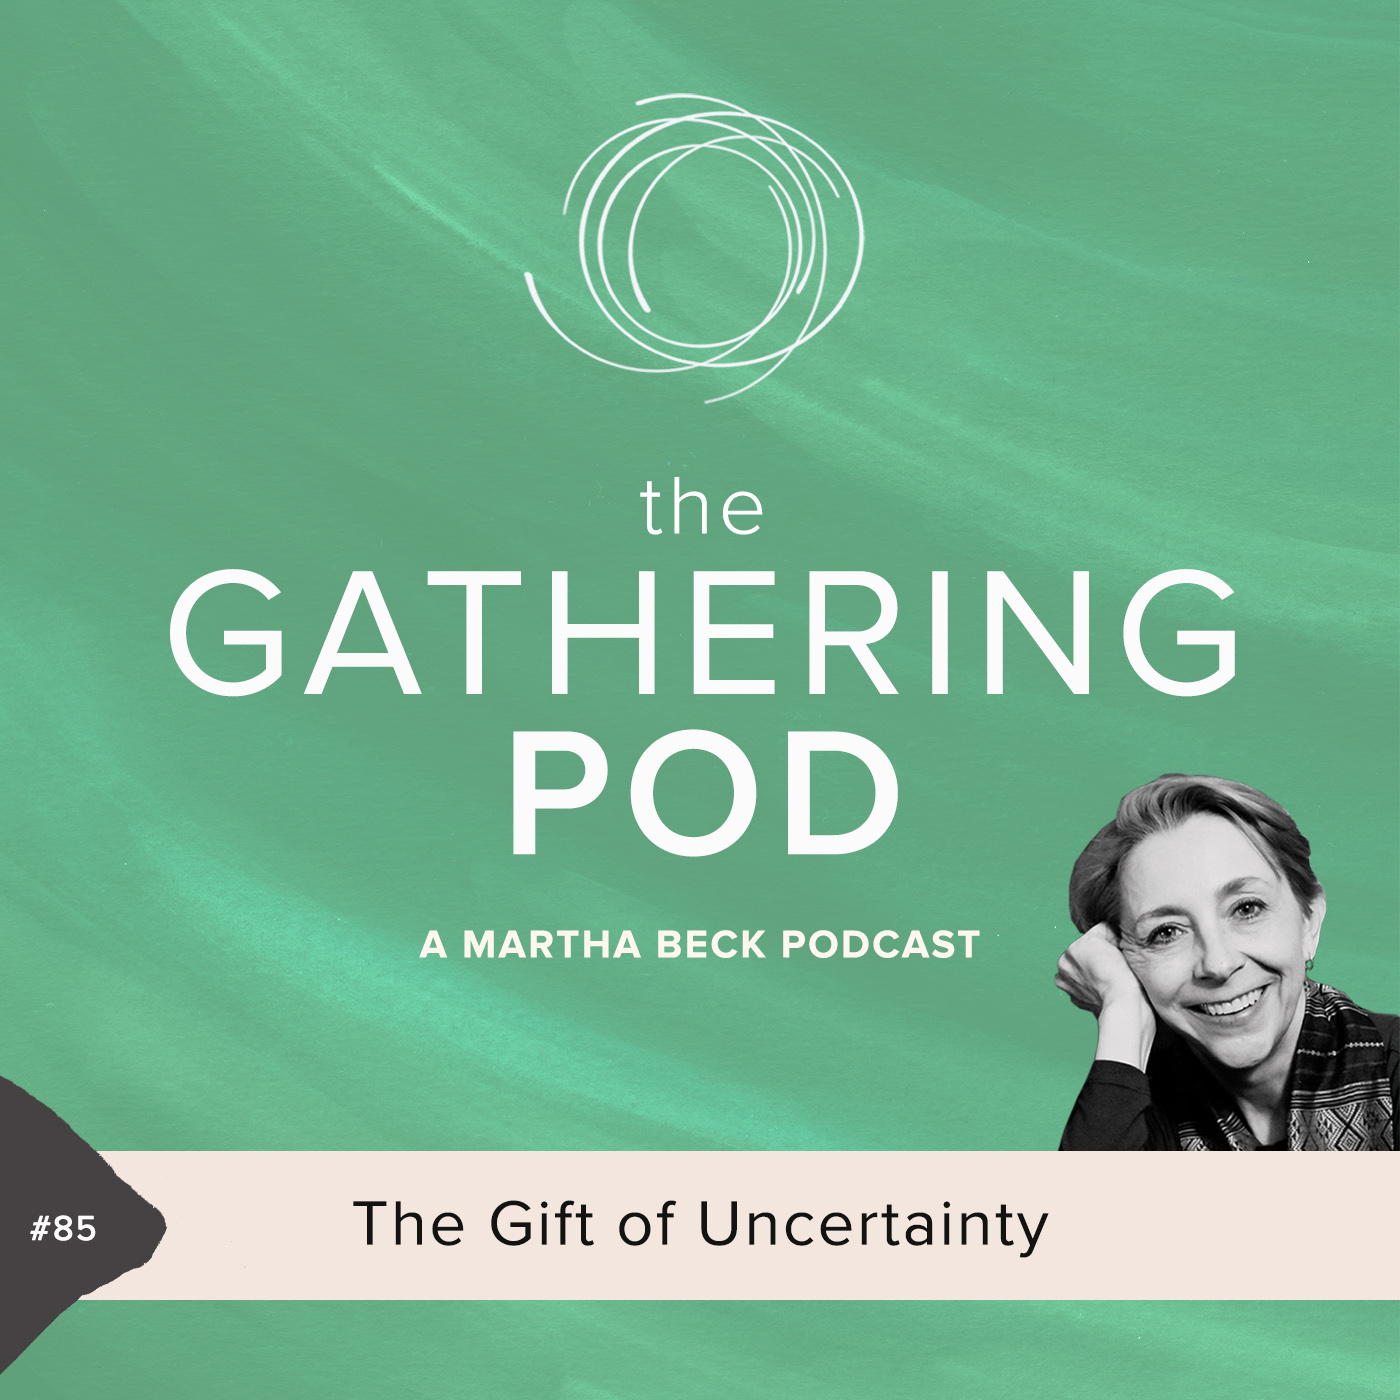 Image for The Gathering Pod A Martha Beck Podcast Episode #85 The Gift of Uncertainty